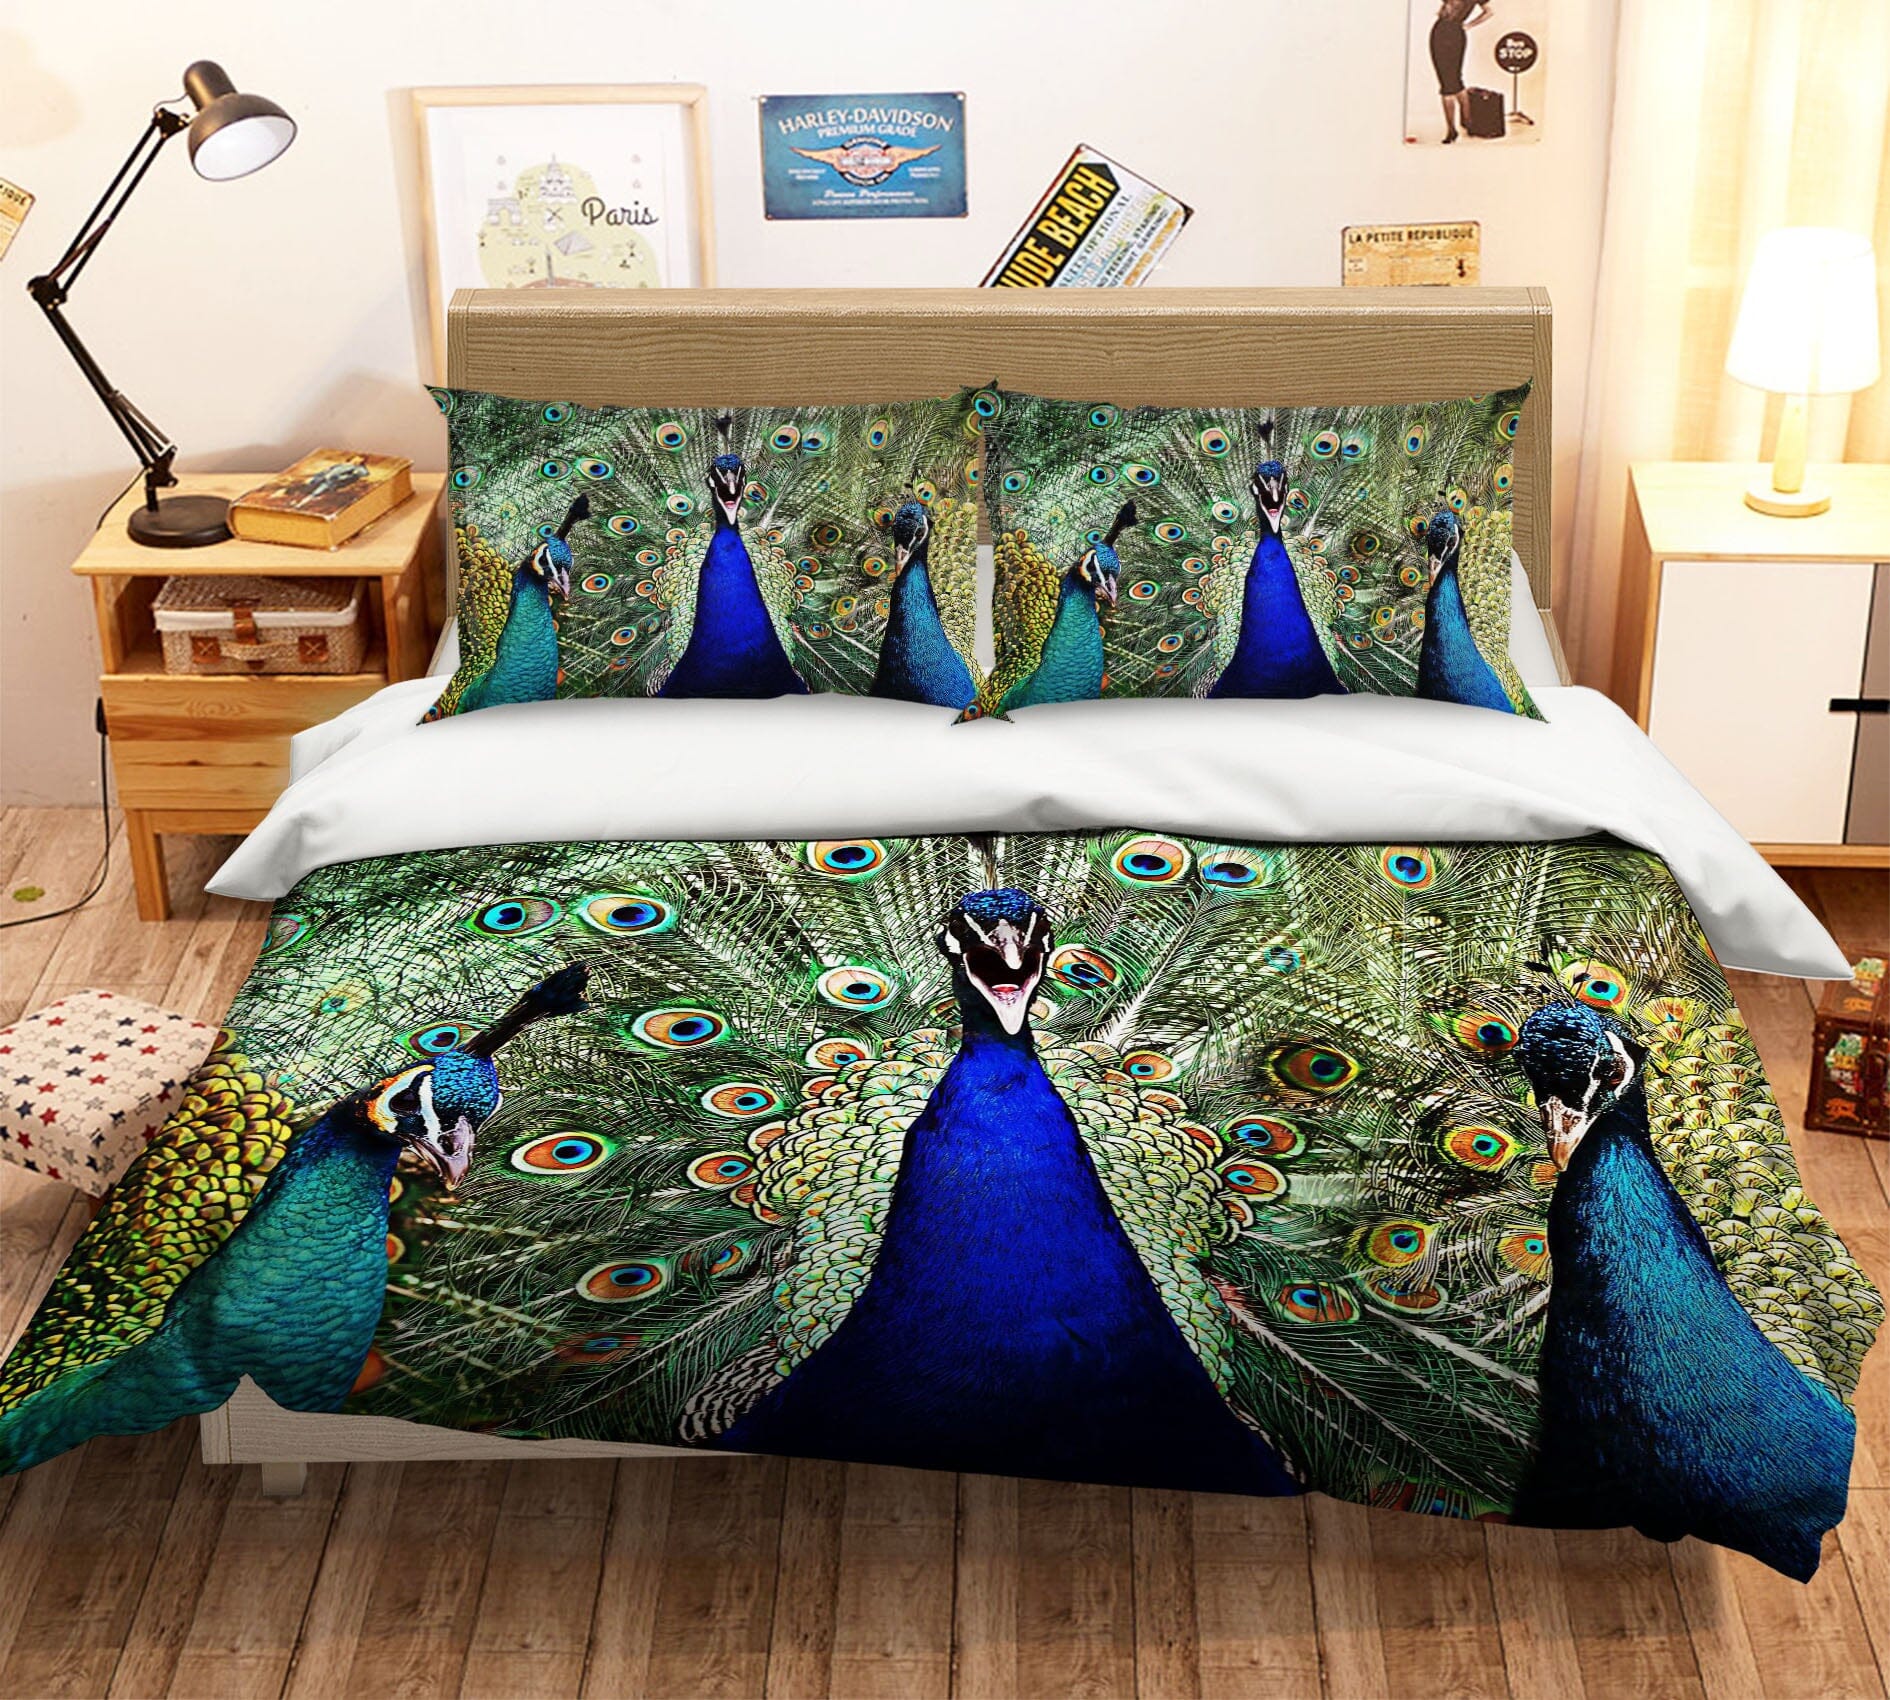 3D Peacock 1917 Bed Pillowcases Quilt Quiet Covers AJ Creativity Home 